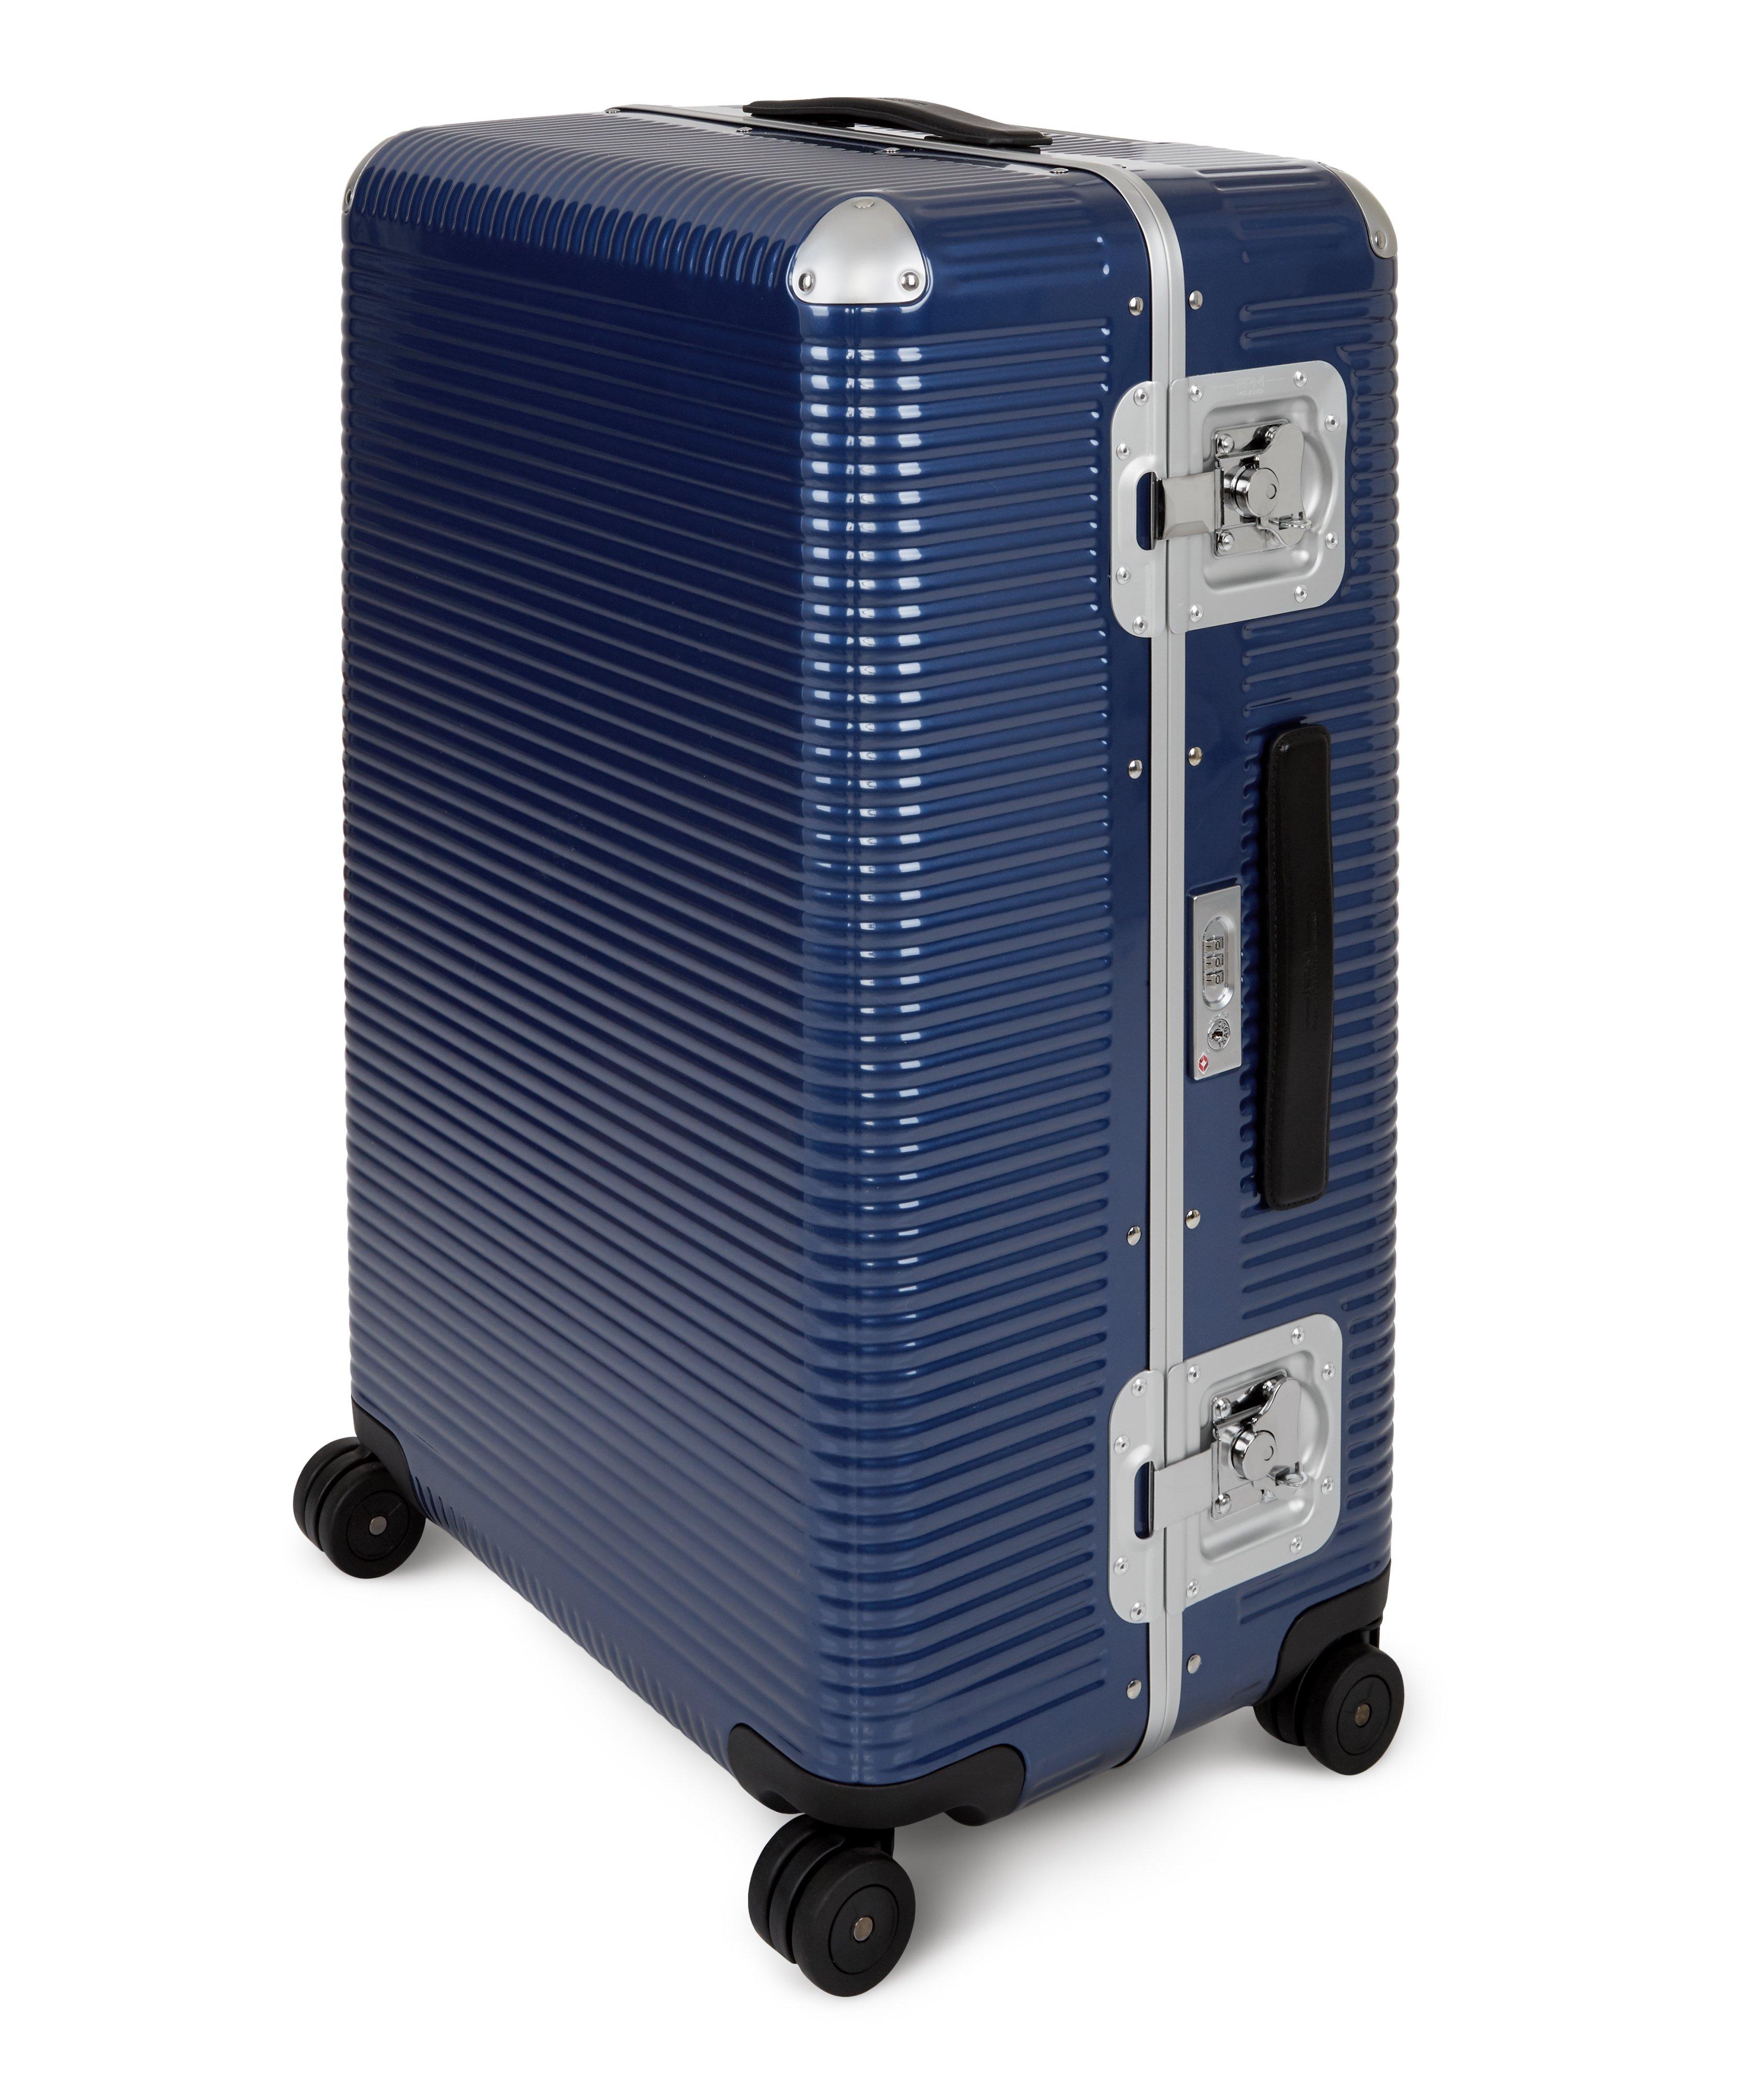 FPM Bank Light Trunk On Wheels Polycarbonate Luggage | Bags & Cases ...